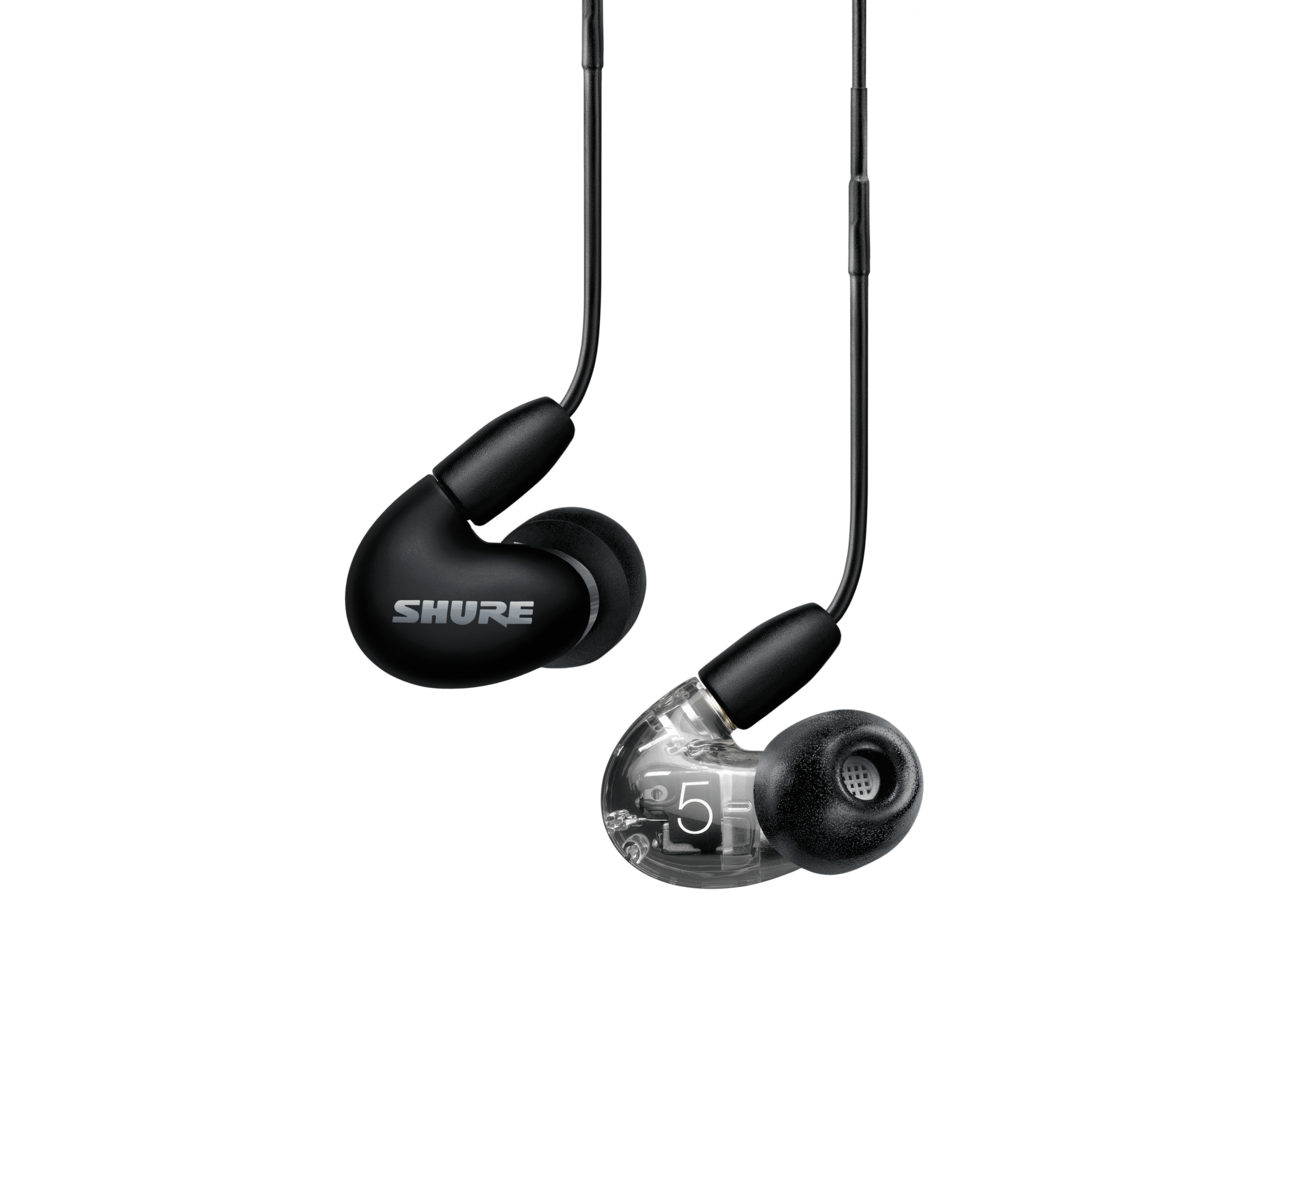 Shure Aonic 5 - Professional In-Ear Monitor Earphones with Remote Control and Microphone